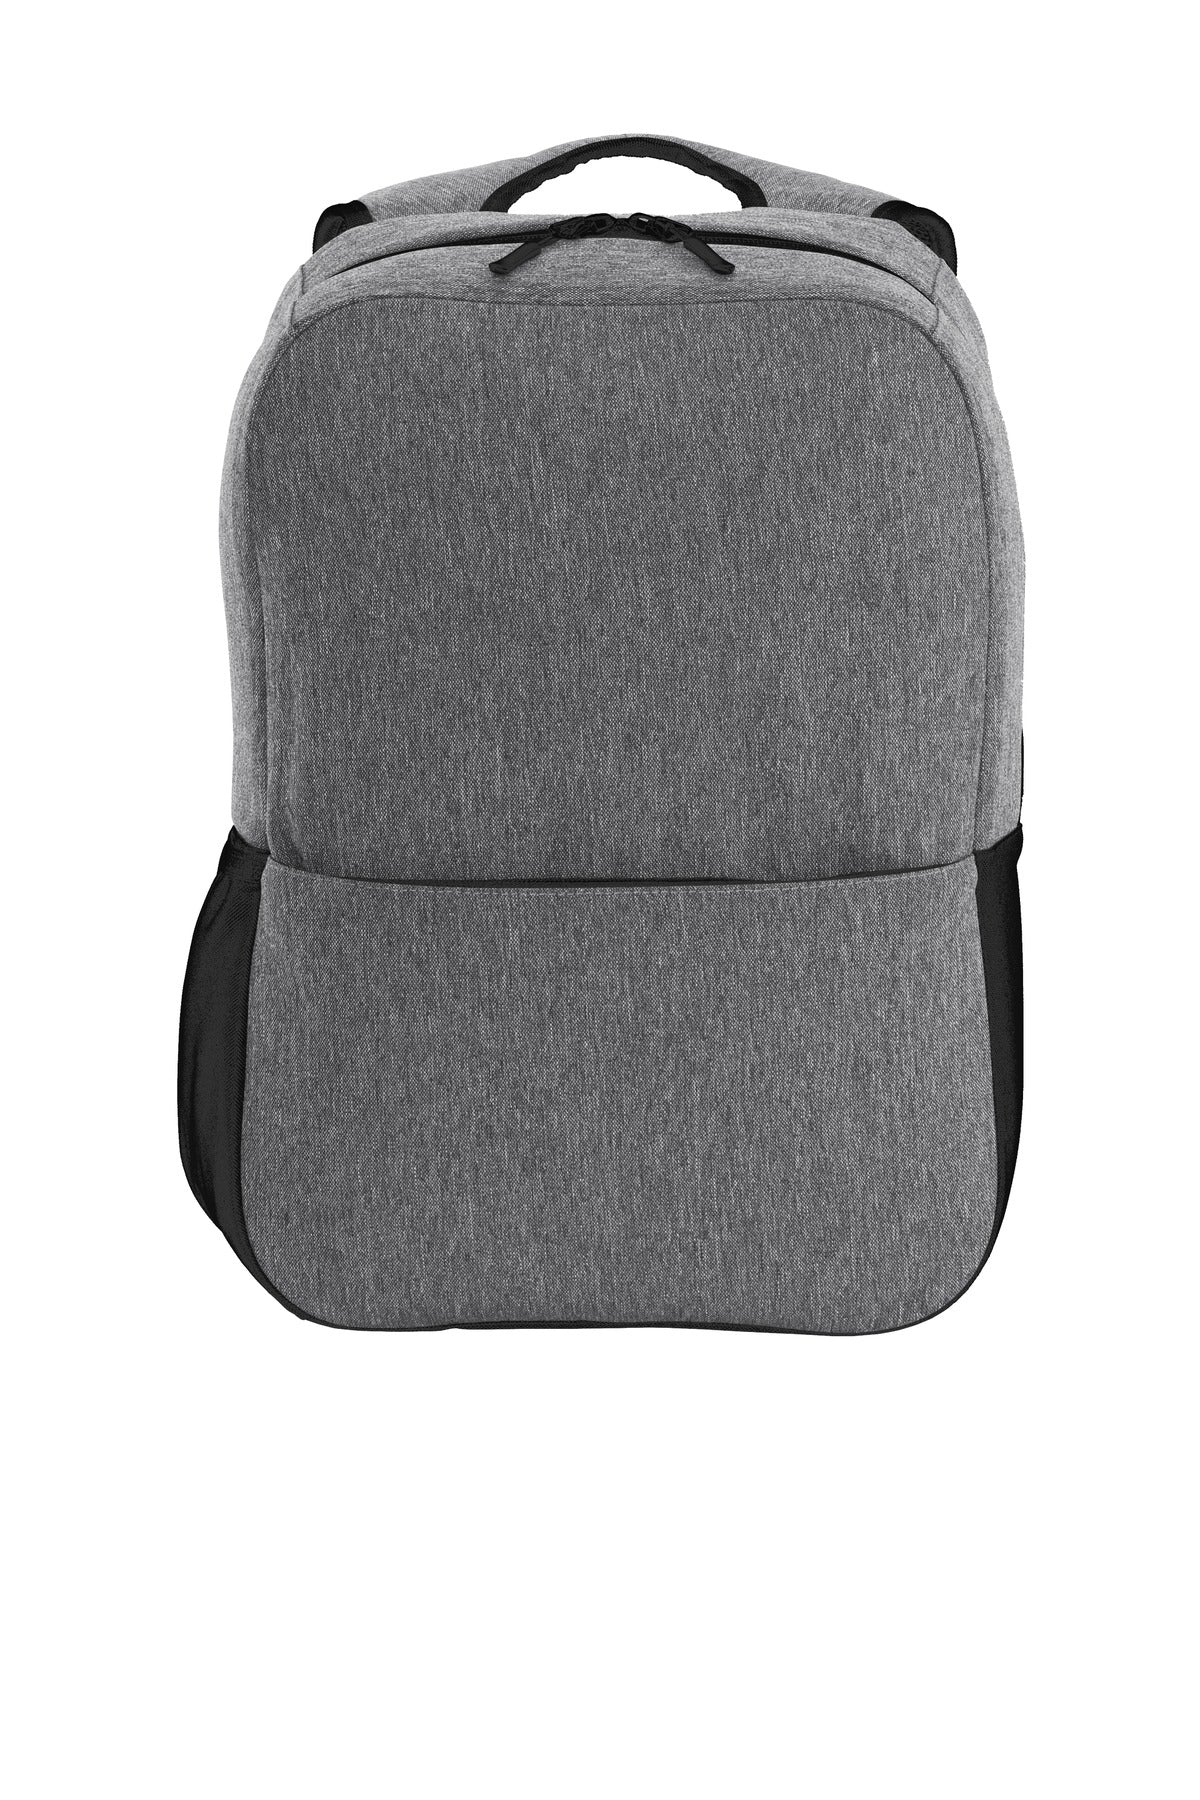 Port Authority ® Access Square Backpack. BG218 - DFW Impression